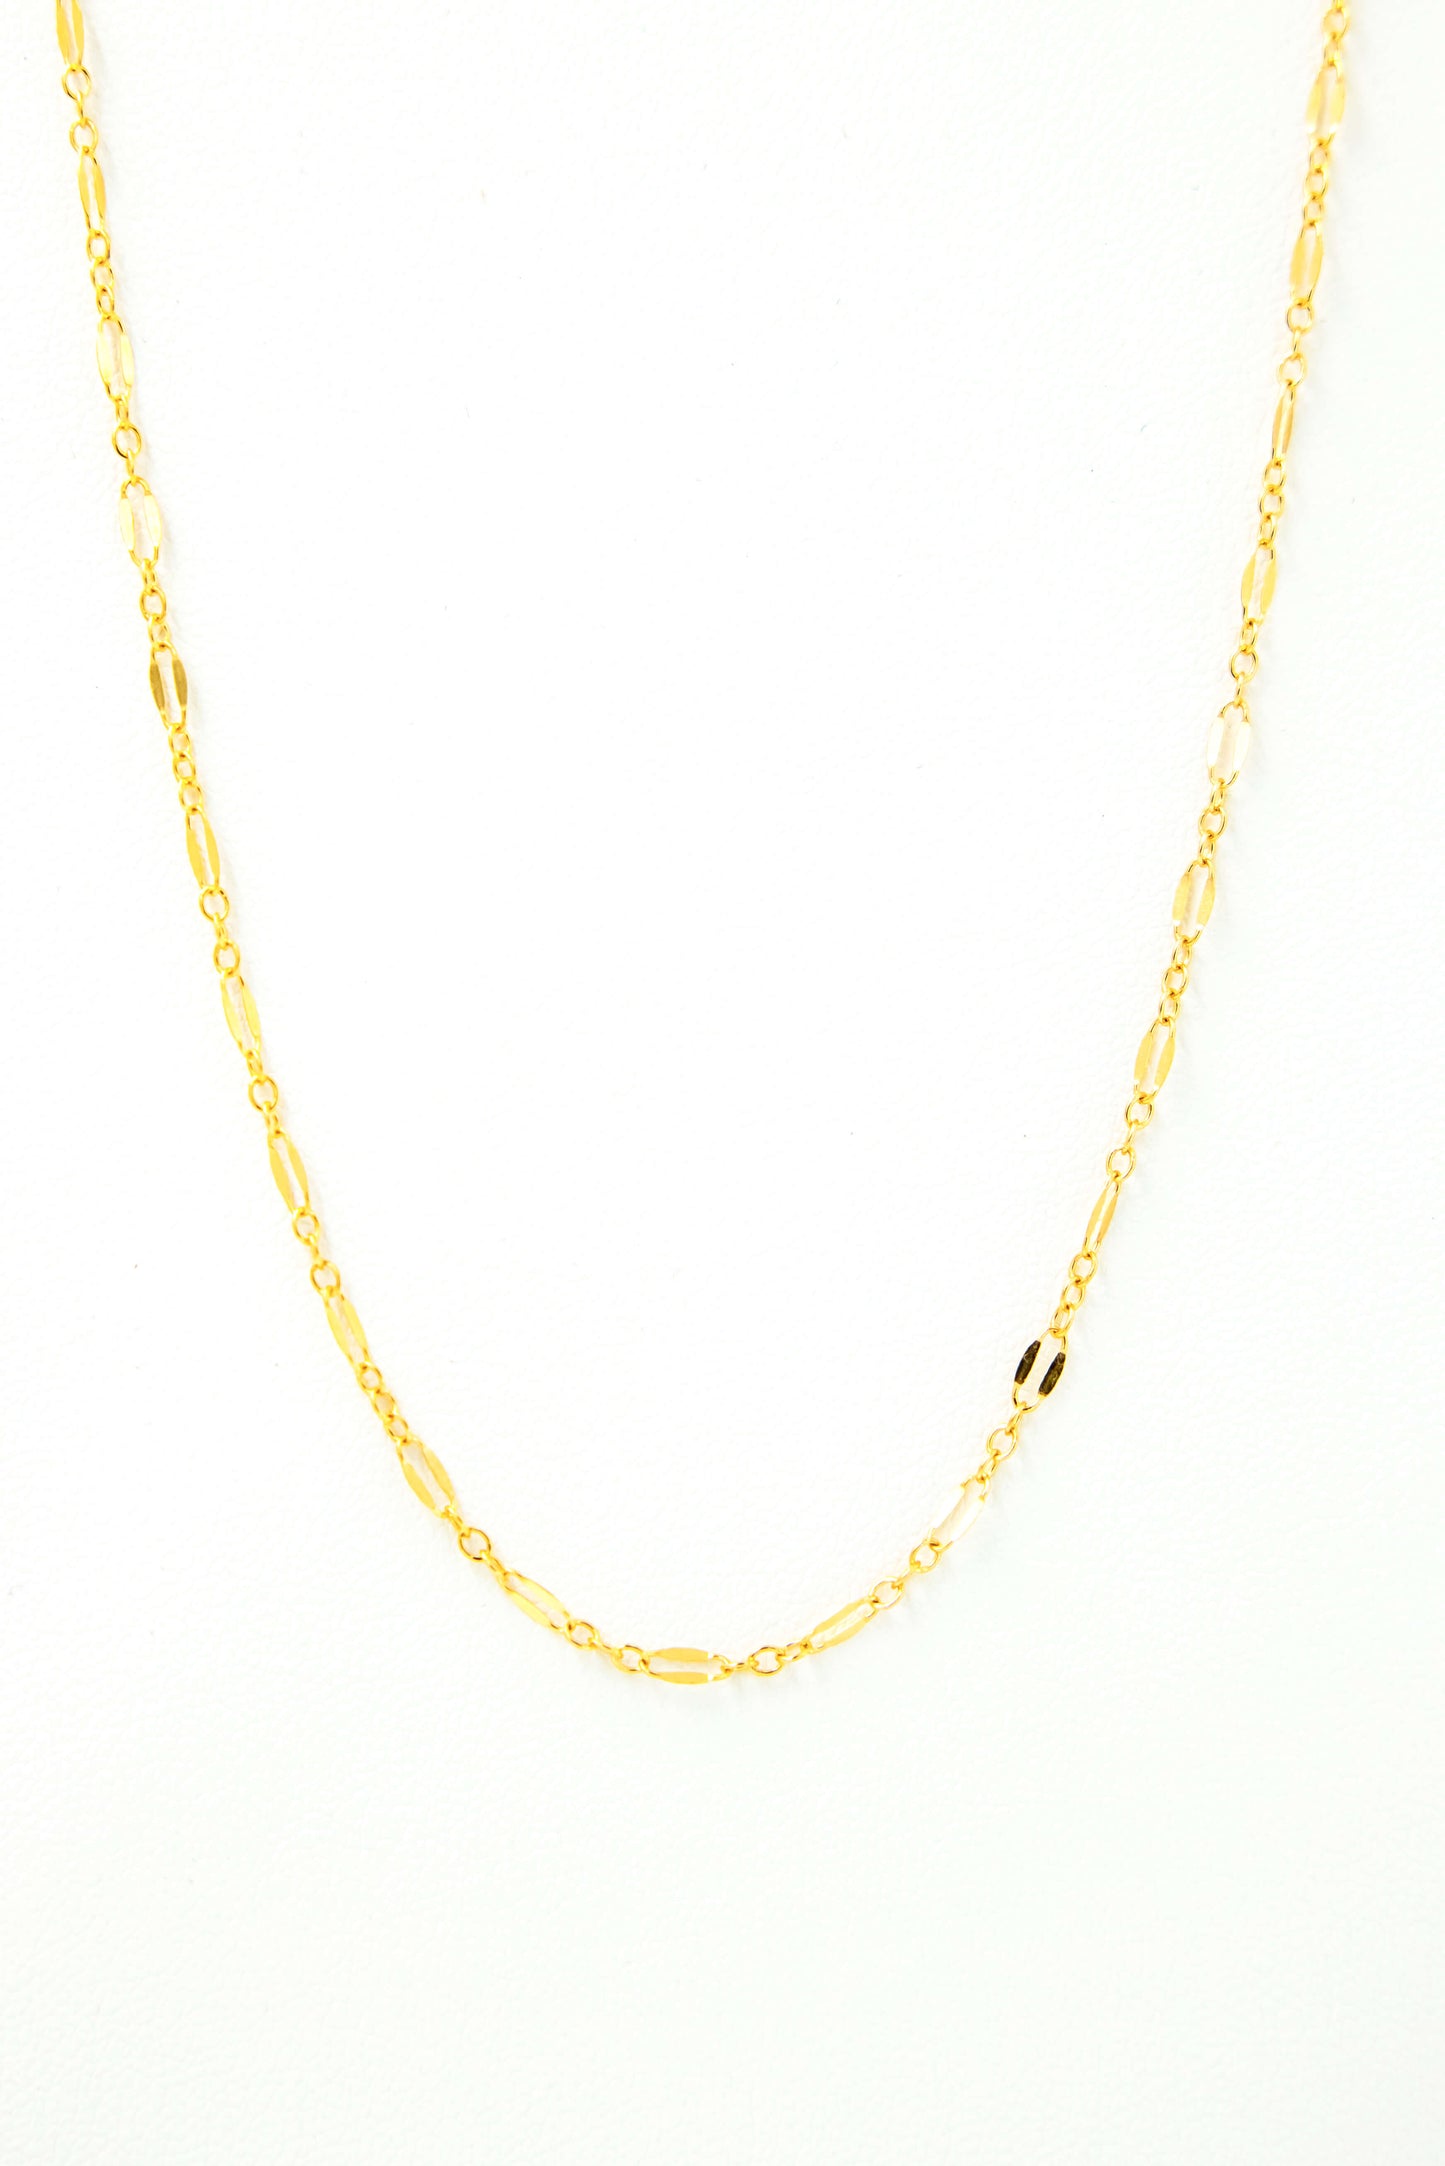 The Ava Necklace